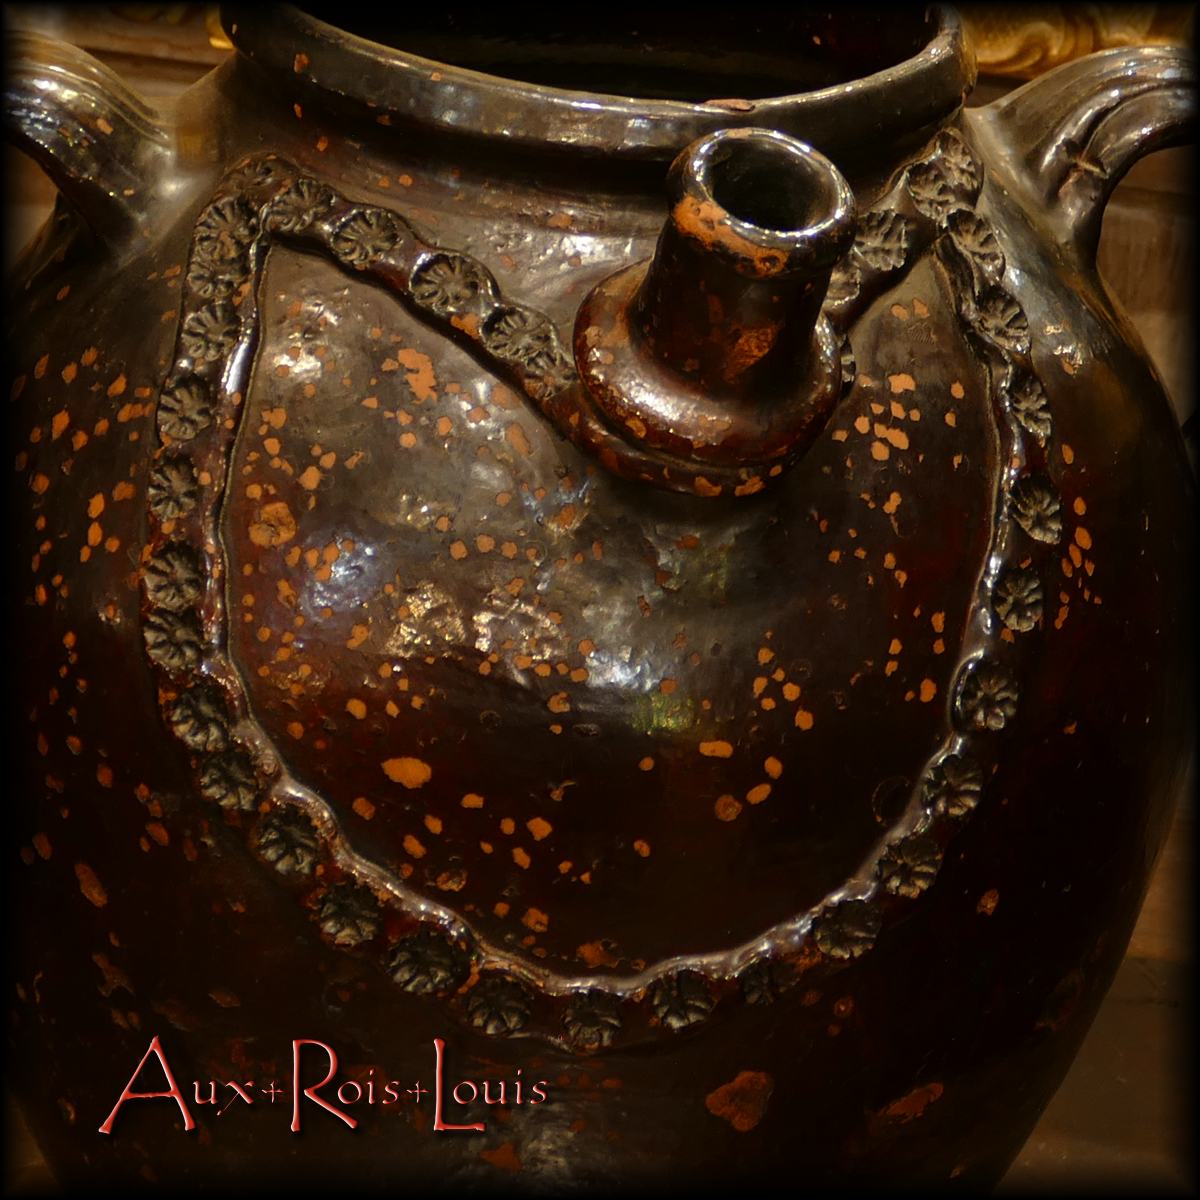 The flower necklace that underlines the spout and caresses the belly of this jug like a precious jewel is the signature of its author, resolutely fell under the spell of what was born under his hands.